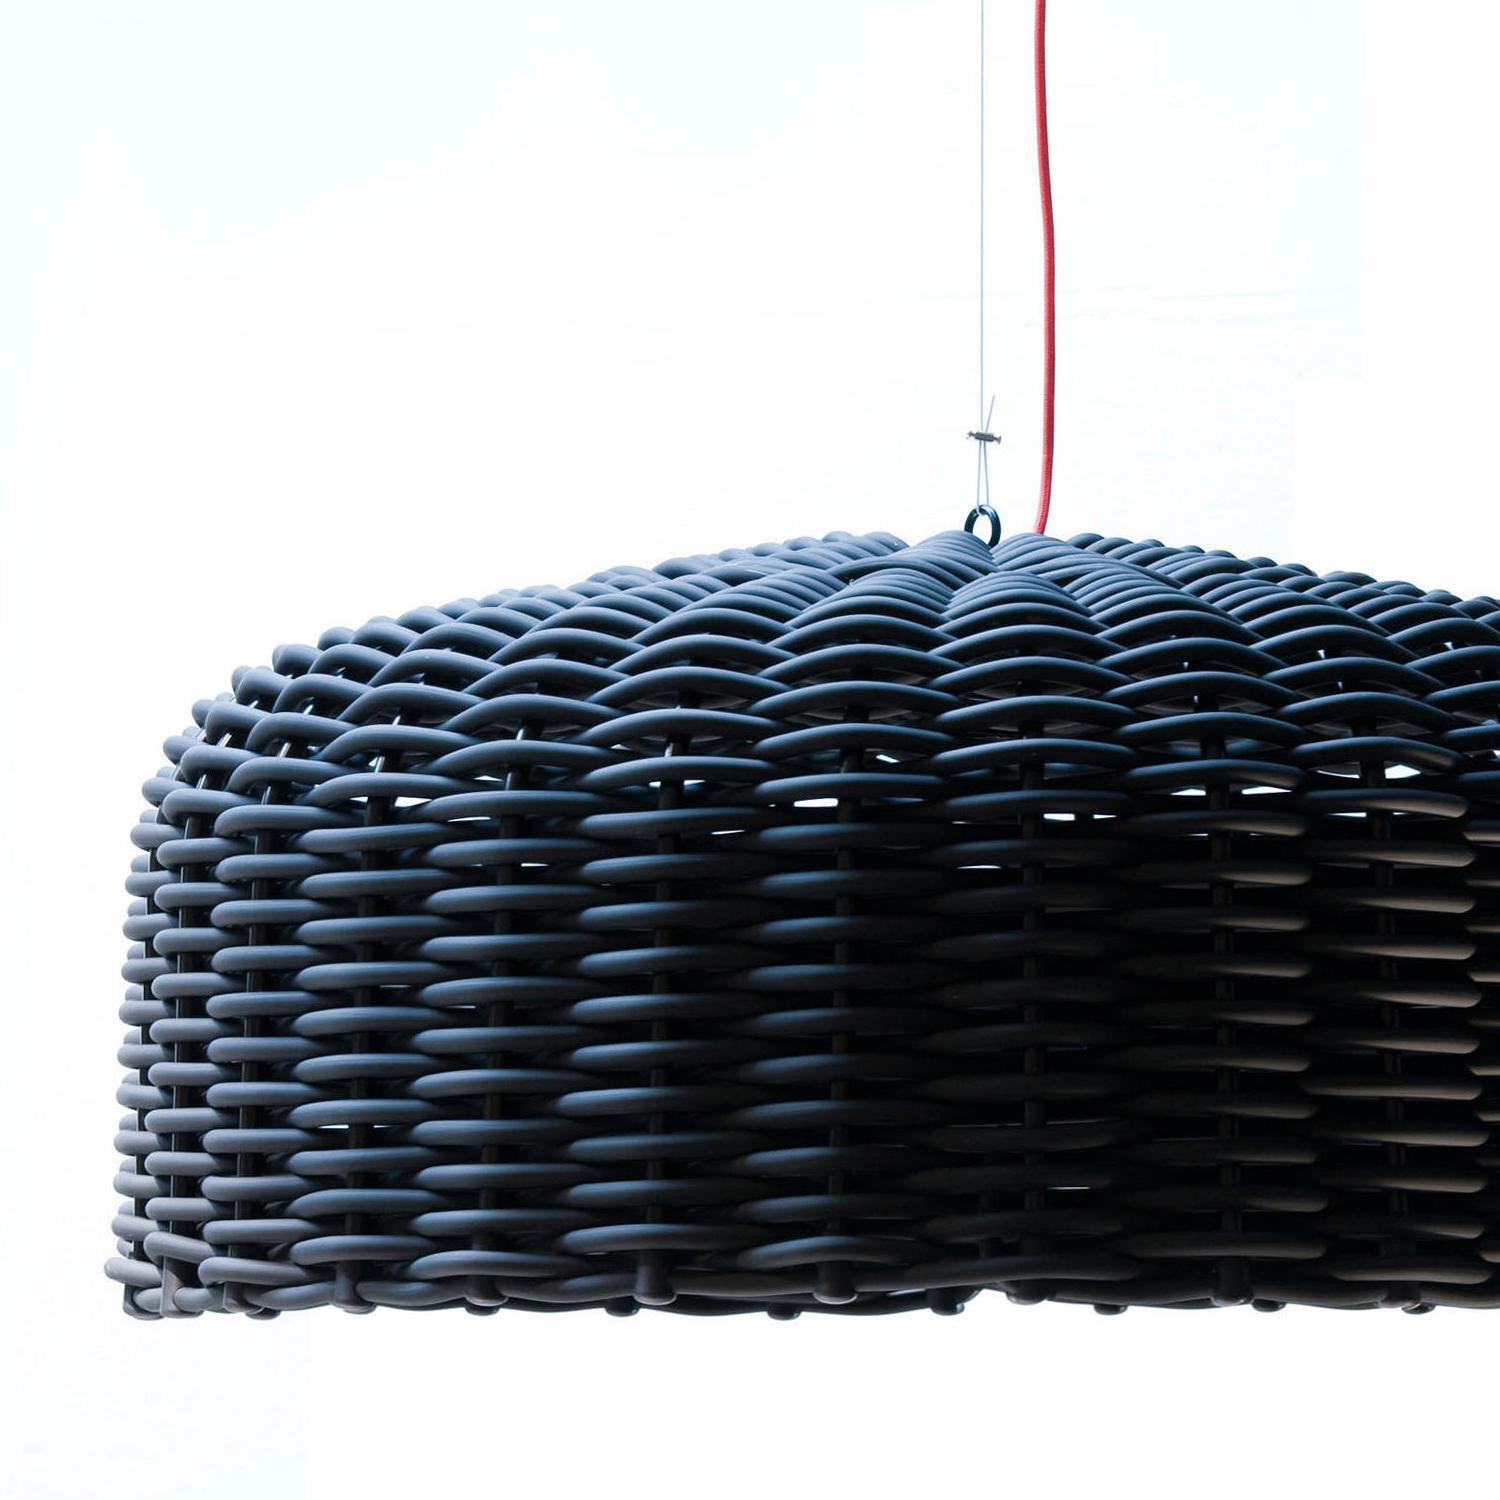 Suspension Ambra Black all in woven PVC in black matt finish.
For 1 bulb, lamp holder type E27, max 18 Watt, 220 Volts.
Bulb not included. Delivered with 250cm electric cable and 
with 200 cm steel cable.
Also available in woven PVC in glossy white